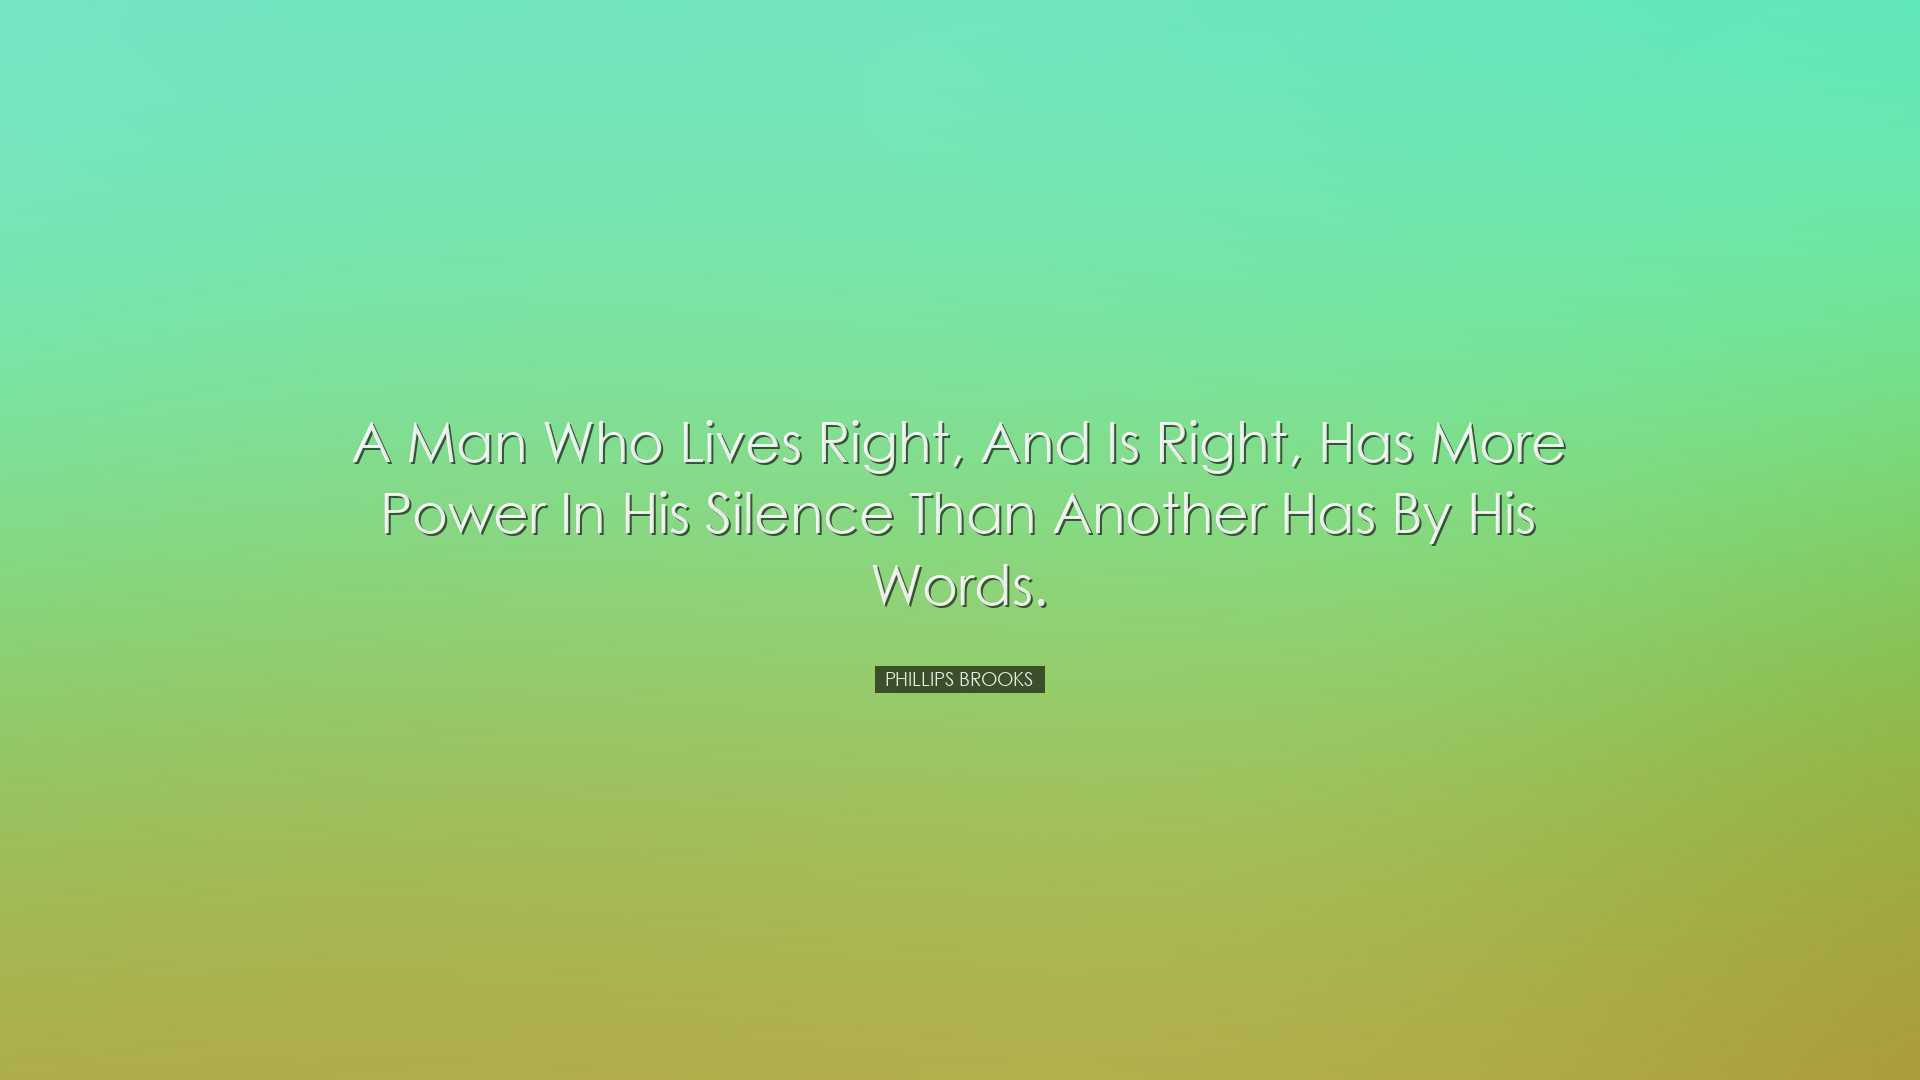 A man who lives right, and is right, has more power in his silence